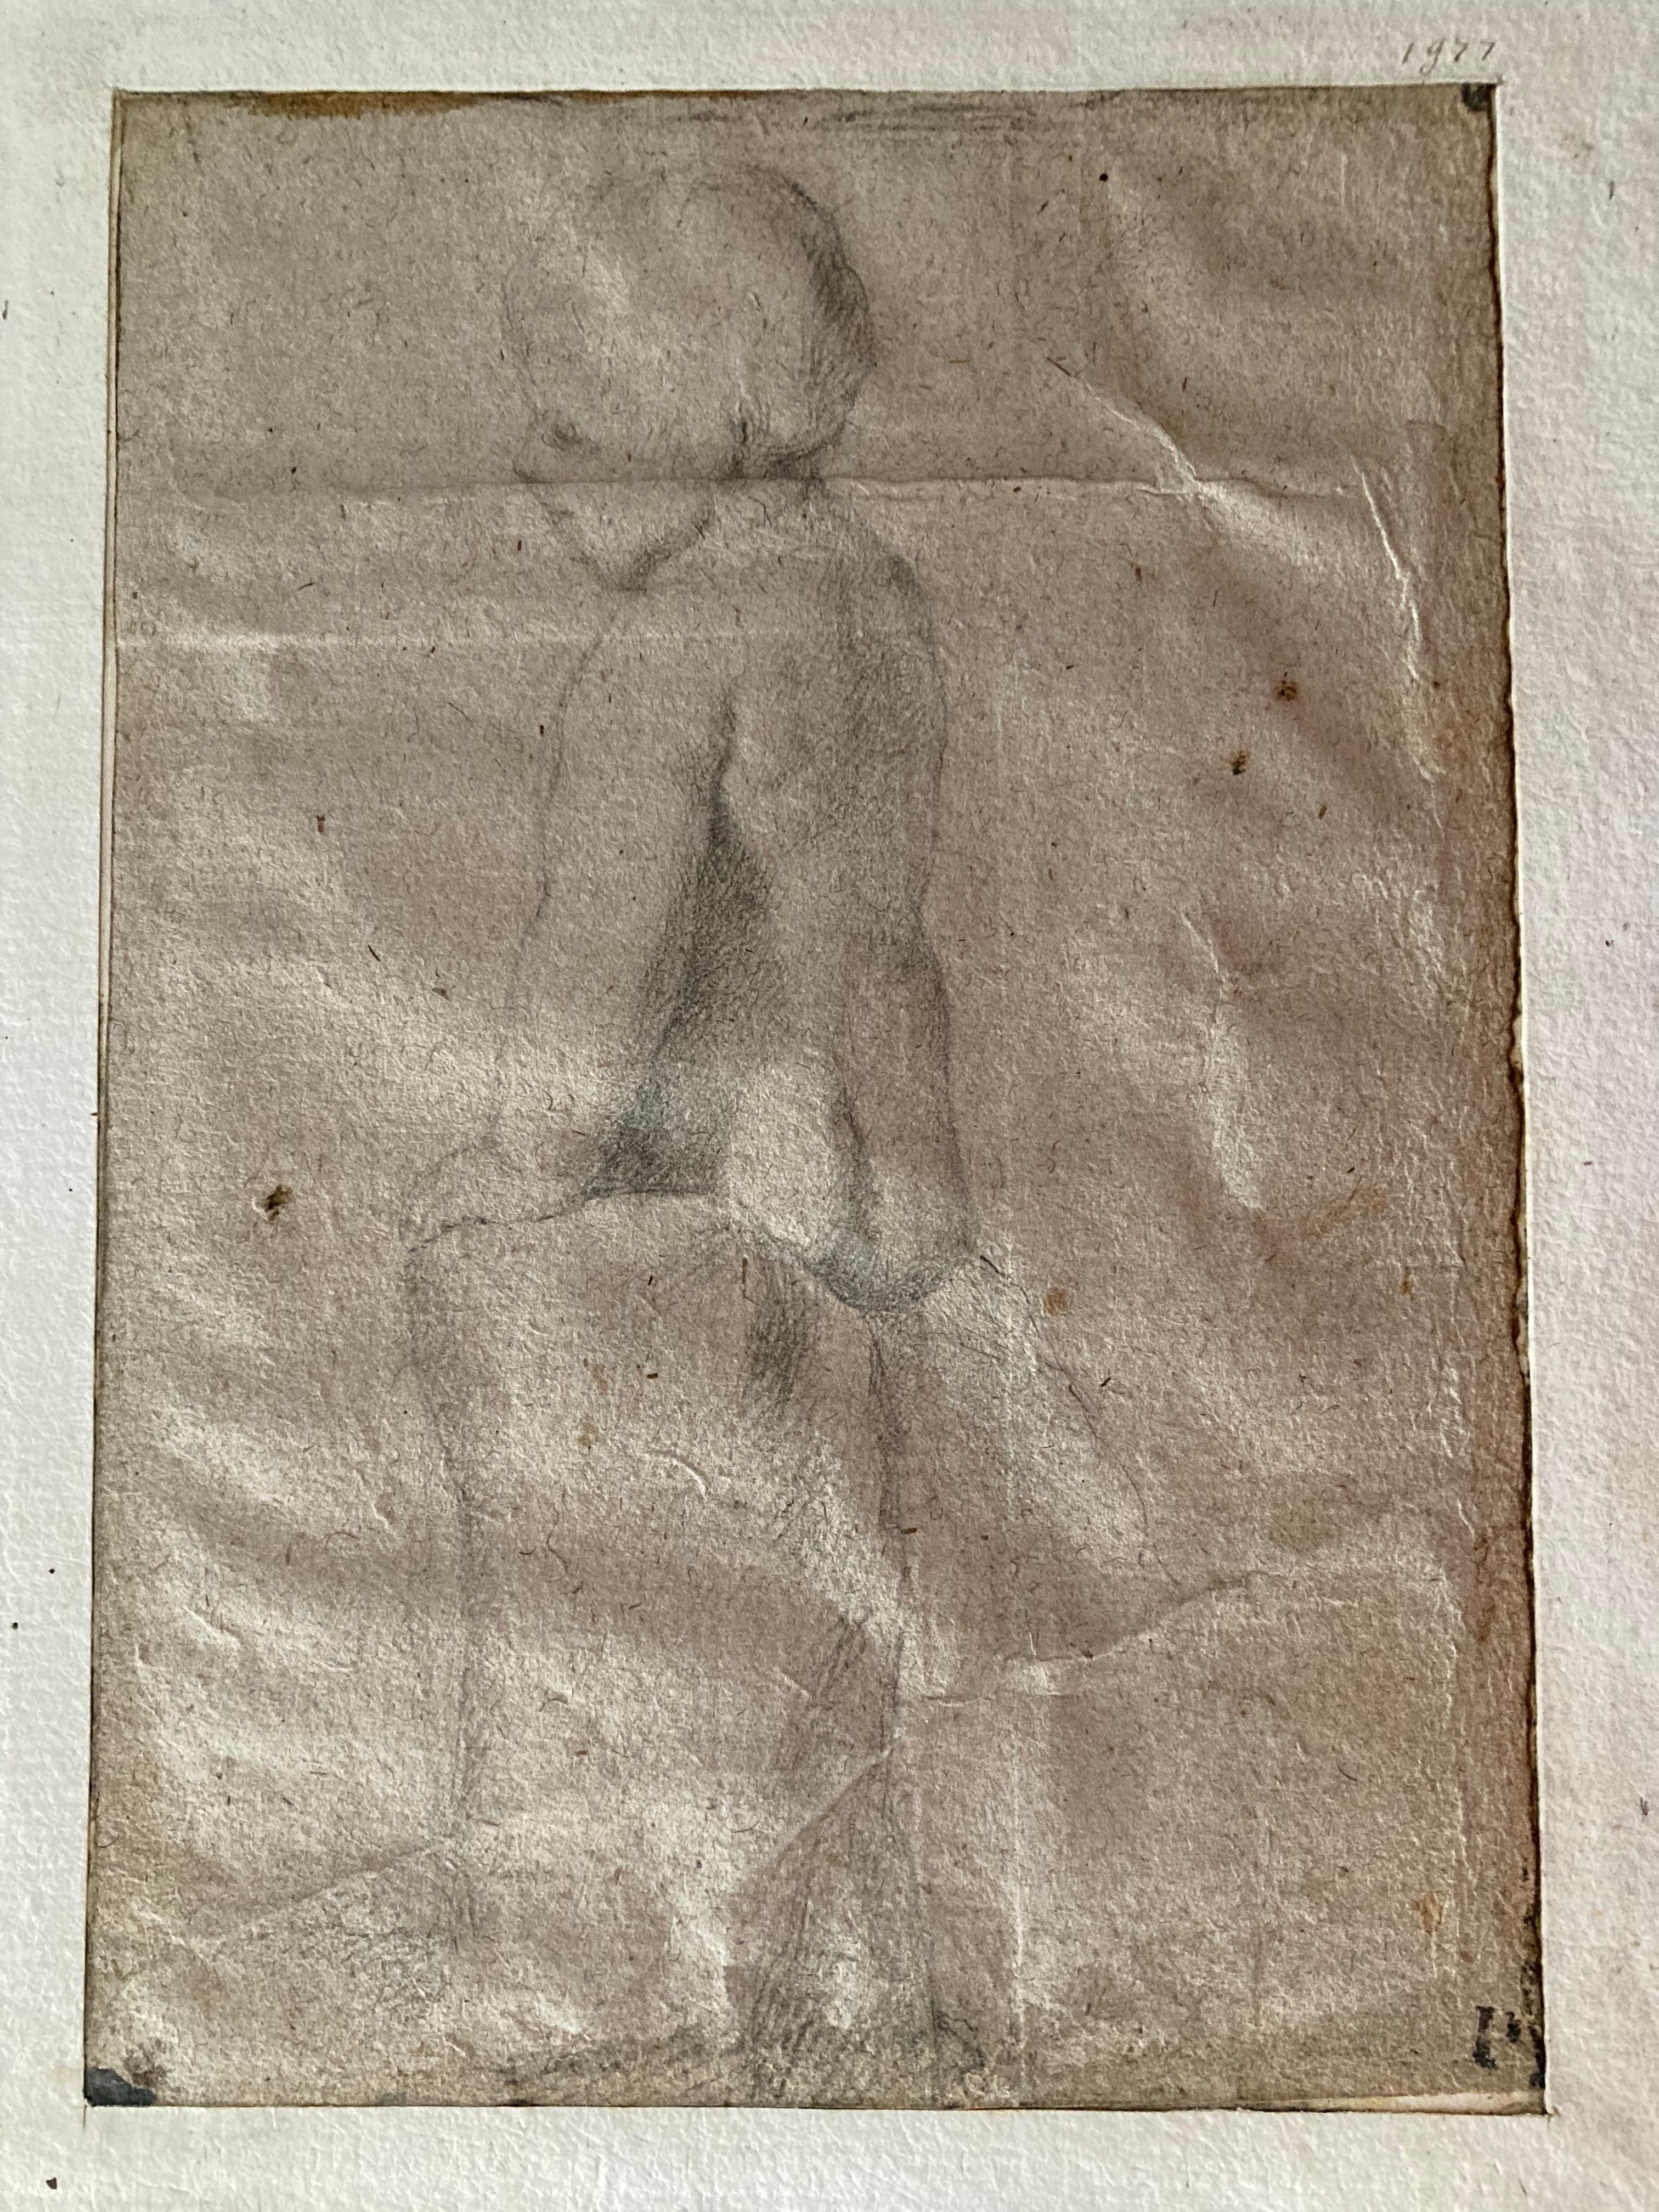 Flemish School, Portrait Young Boy, Old Master Drawing, Baroque, 17th Century For Sale 1